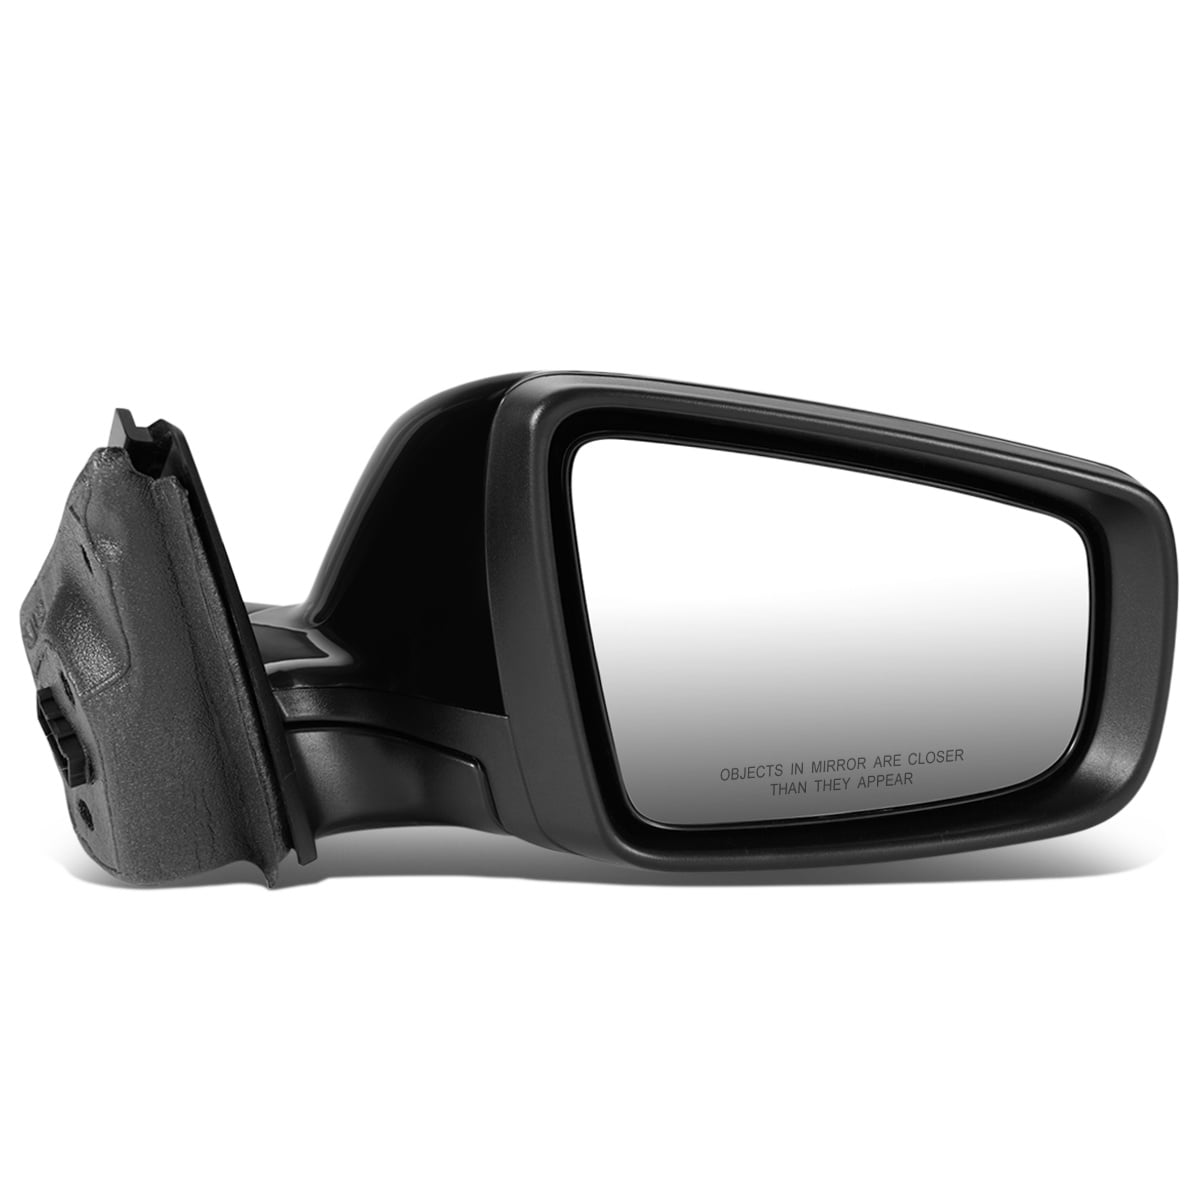 Driver and Passenger Power Side Trailer Tow Flip-Up Mirrors Heated Replacement for Dodge 7x10 Pickup Truck 55077445AO 55077444AO 